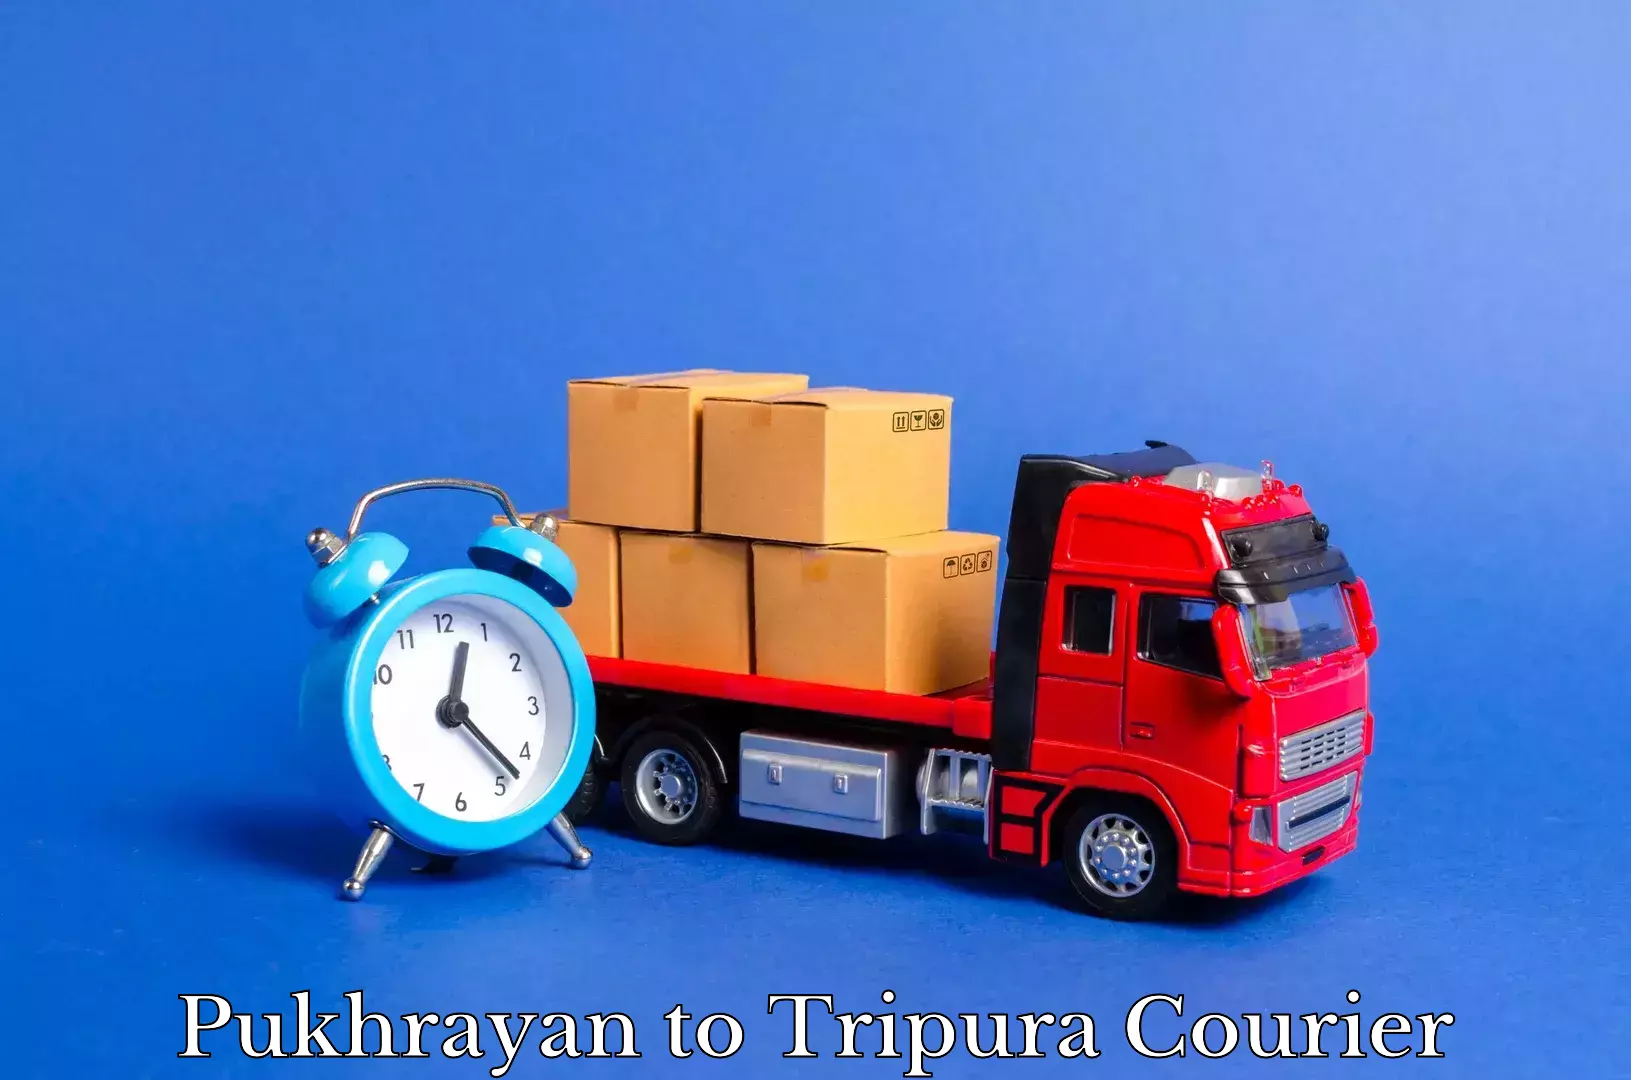 Furniture delivery service Pukhrayan to West Tripura